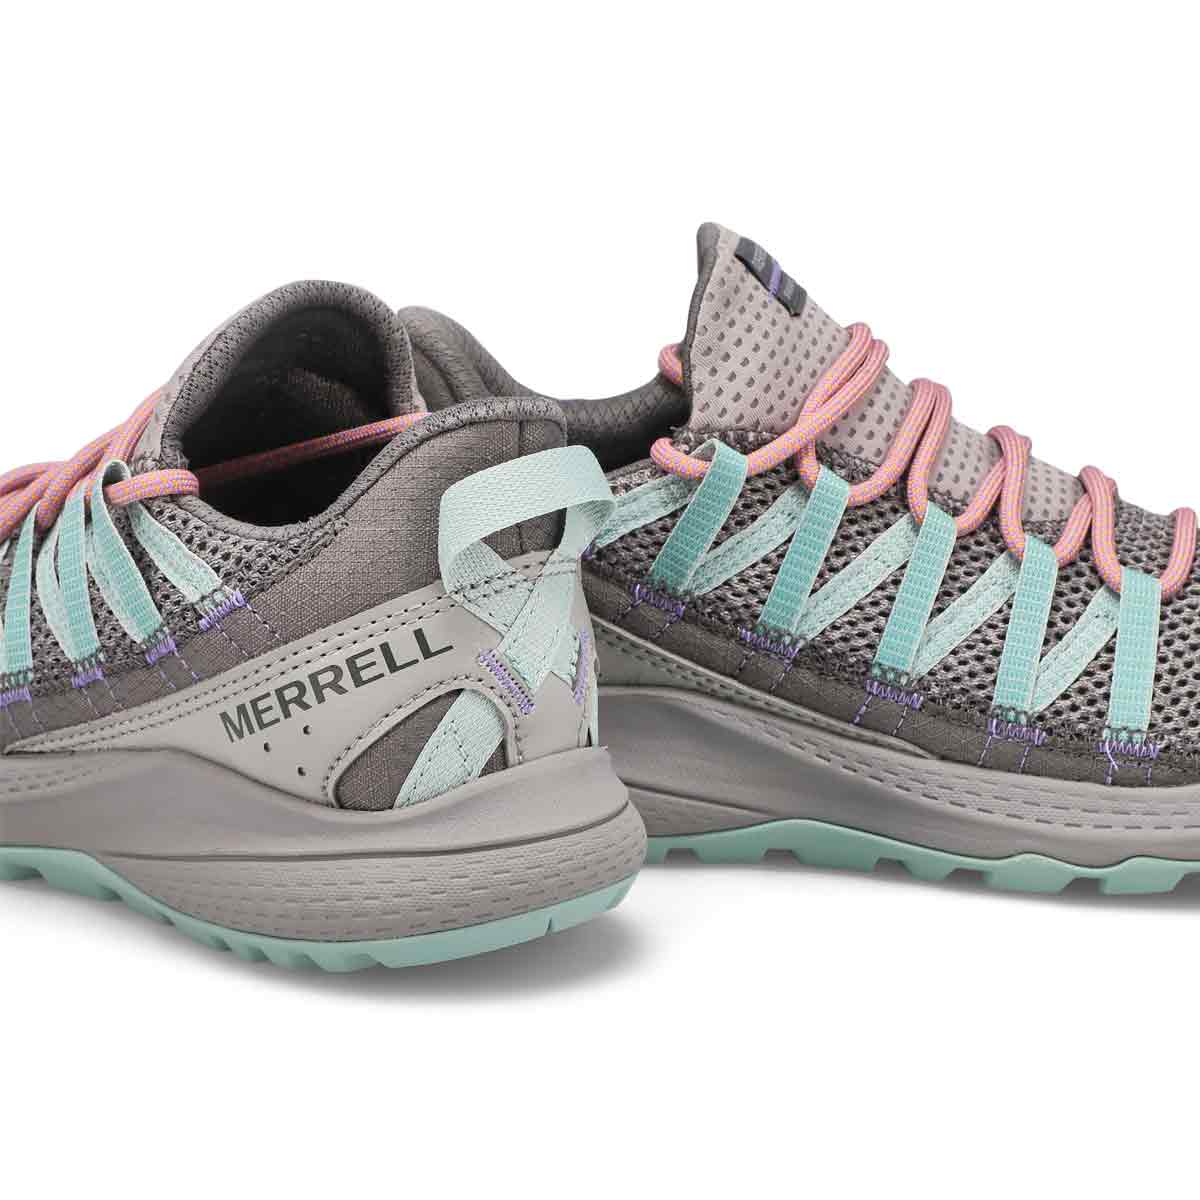 Merrell - Soft and sticky! 👣 The Bravada SN/KER features